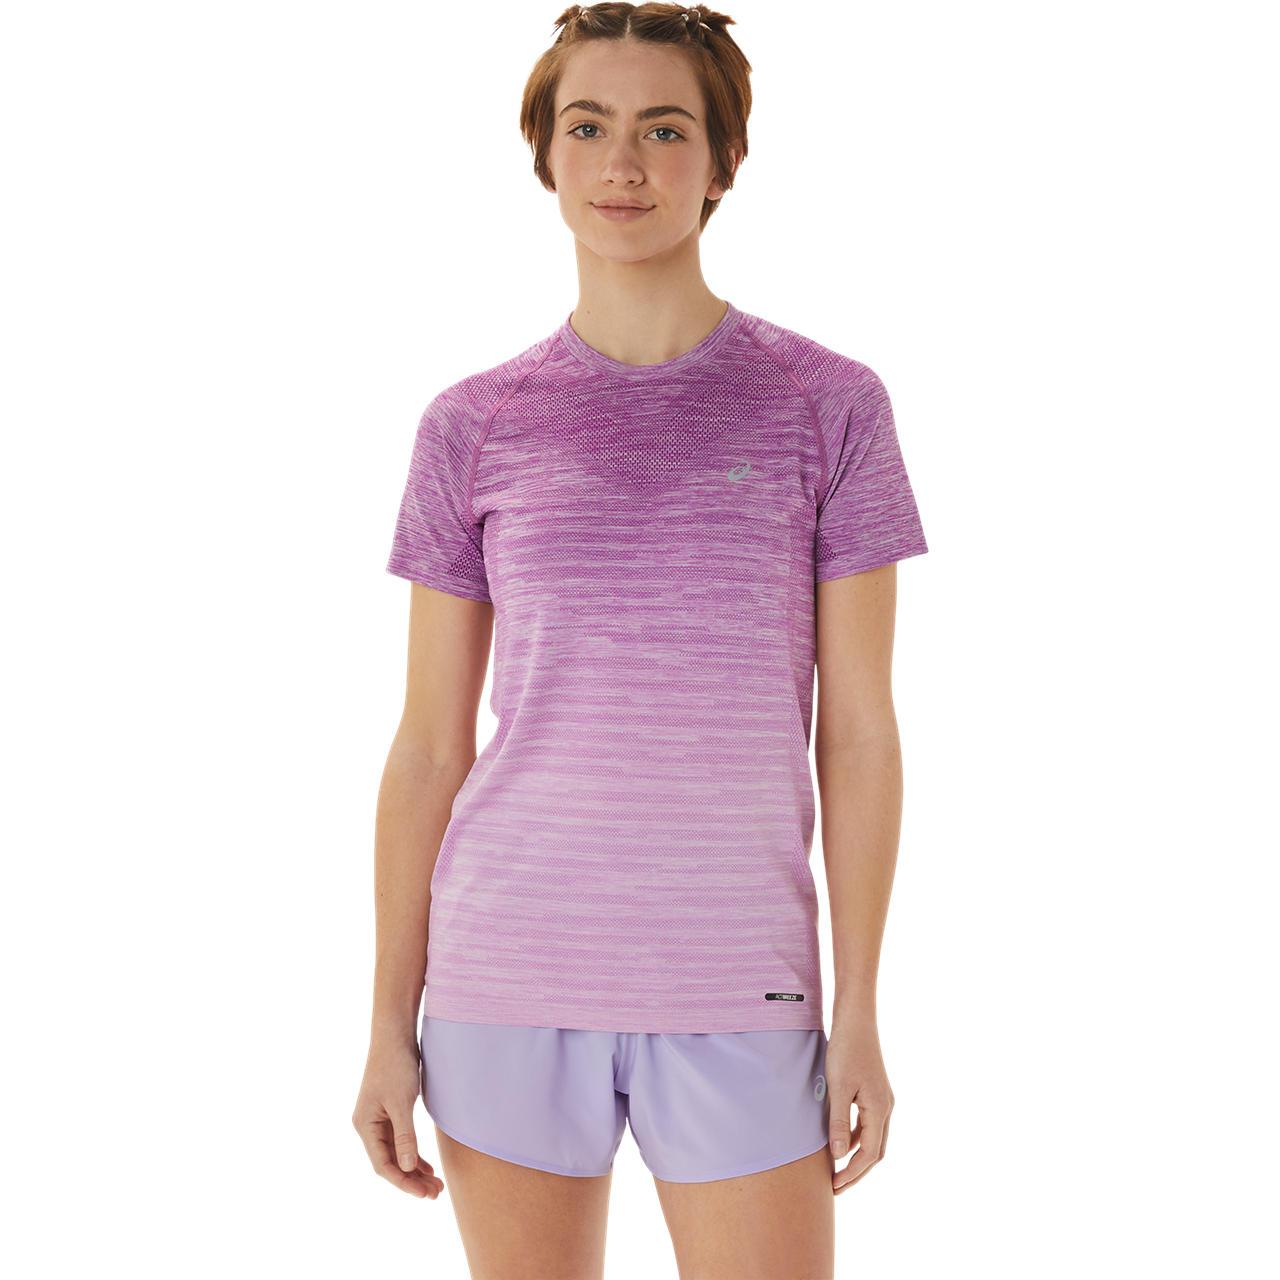 Asics Womens Seamless Ss Top - Orchid/lavender Glow